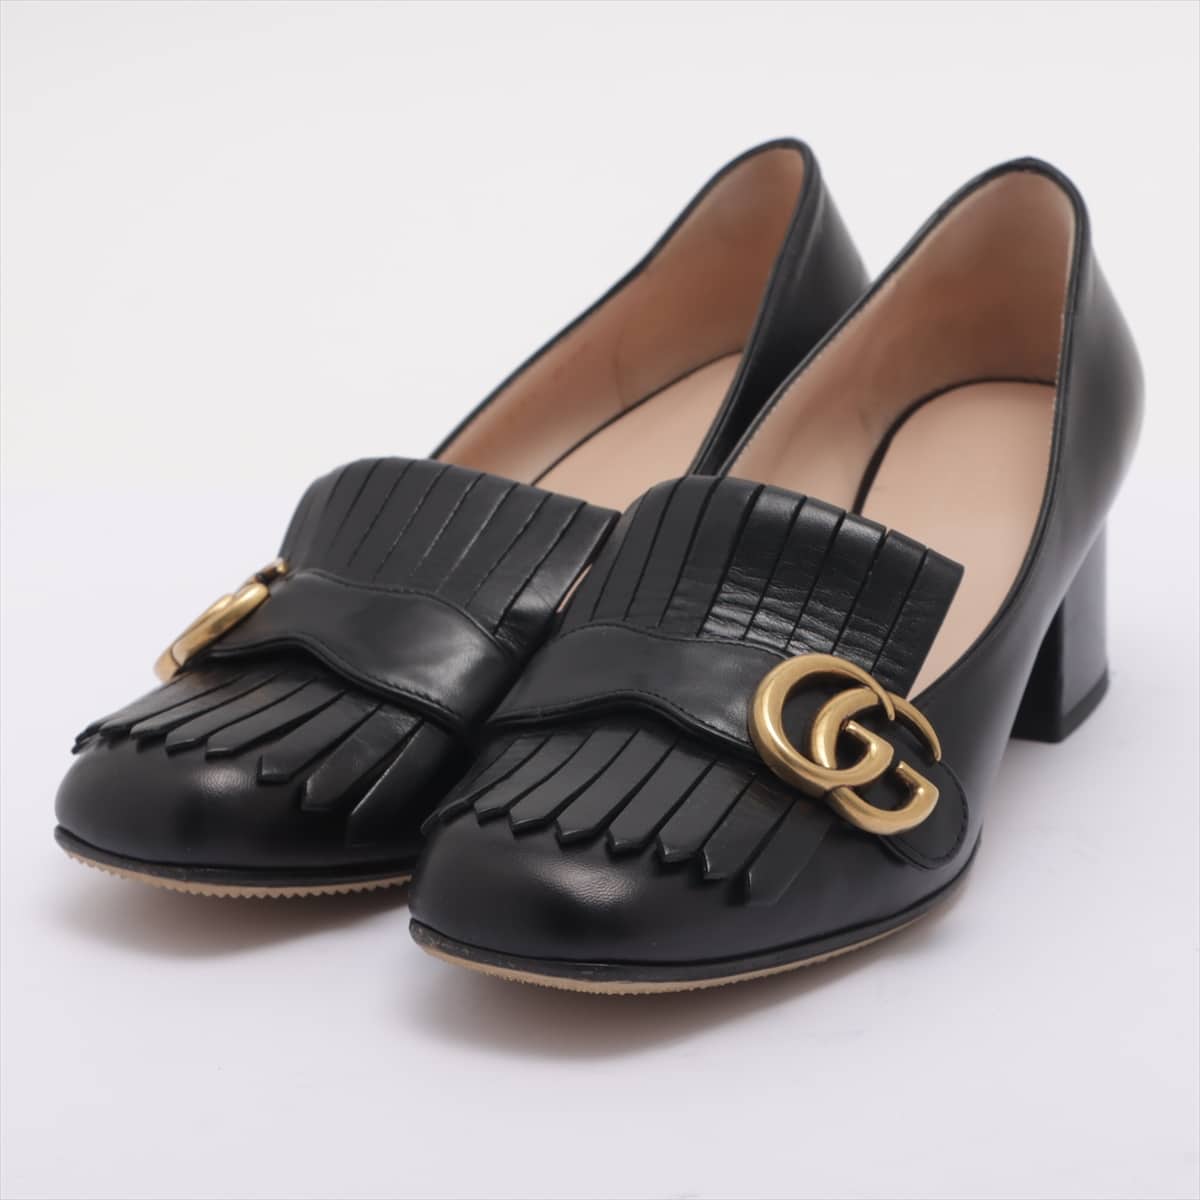 Gucci GG Marmont Leather Pumps 37 1/2 Ladies' Black 408208 There is a metal fitting thread